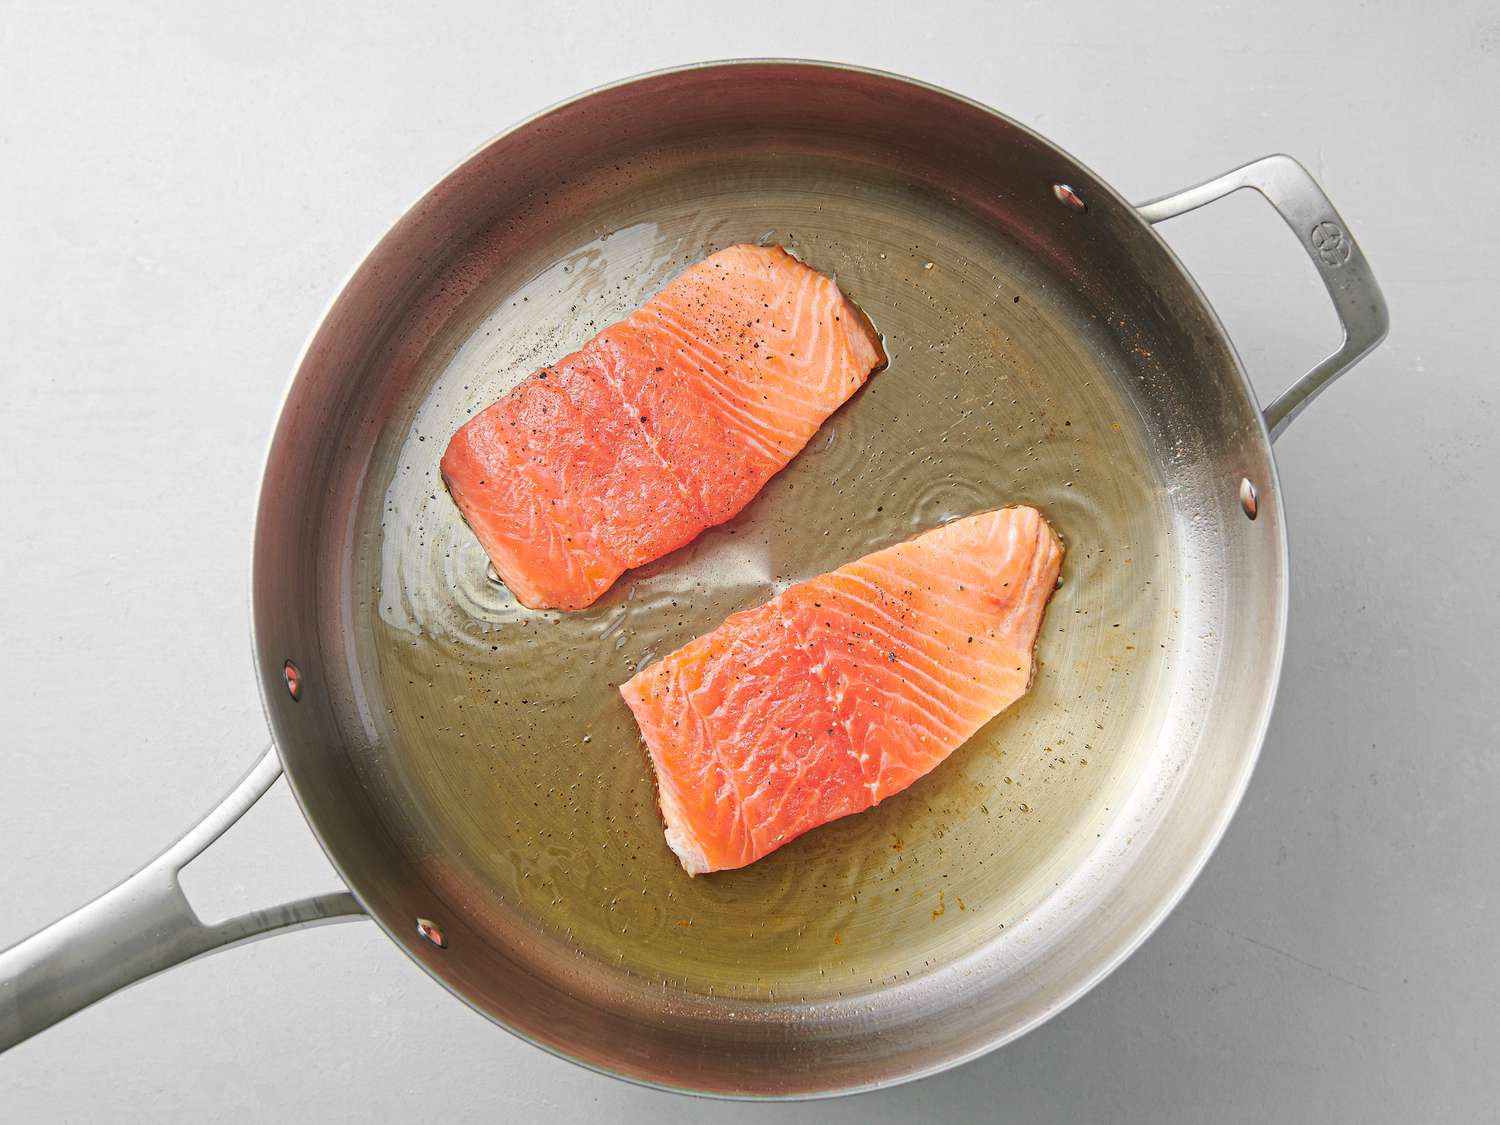 Salmon cooking skin-side-down in oil inside a 12-inch stainless steel skillet